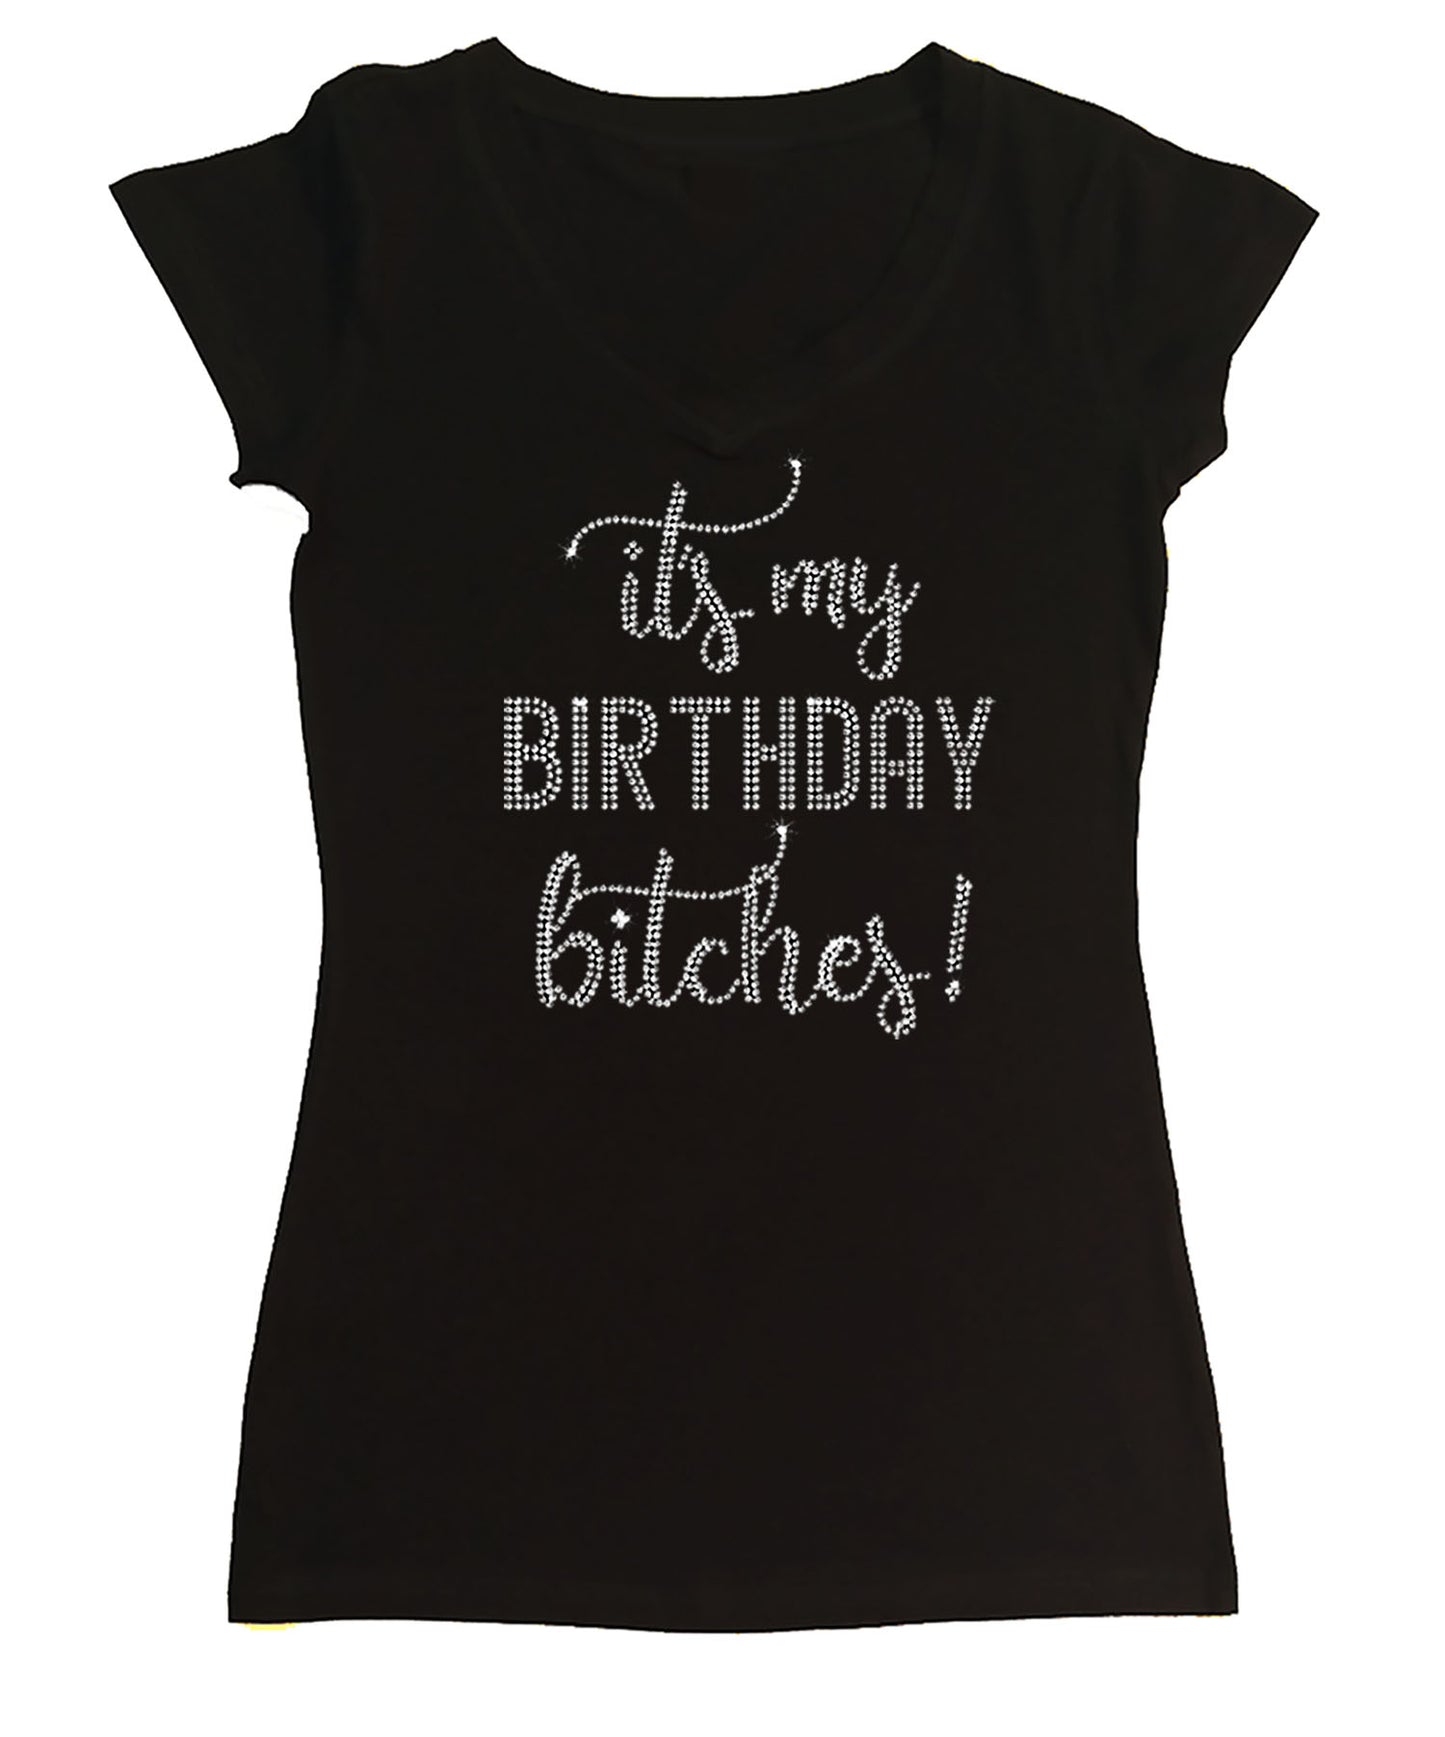 Womens T-shirt with It's MyBirthday Bithches in Rhinestones